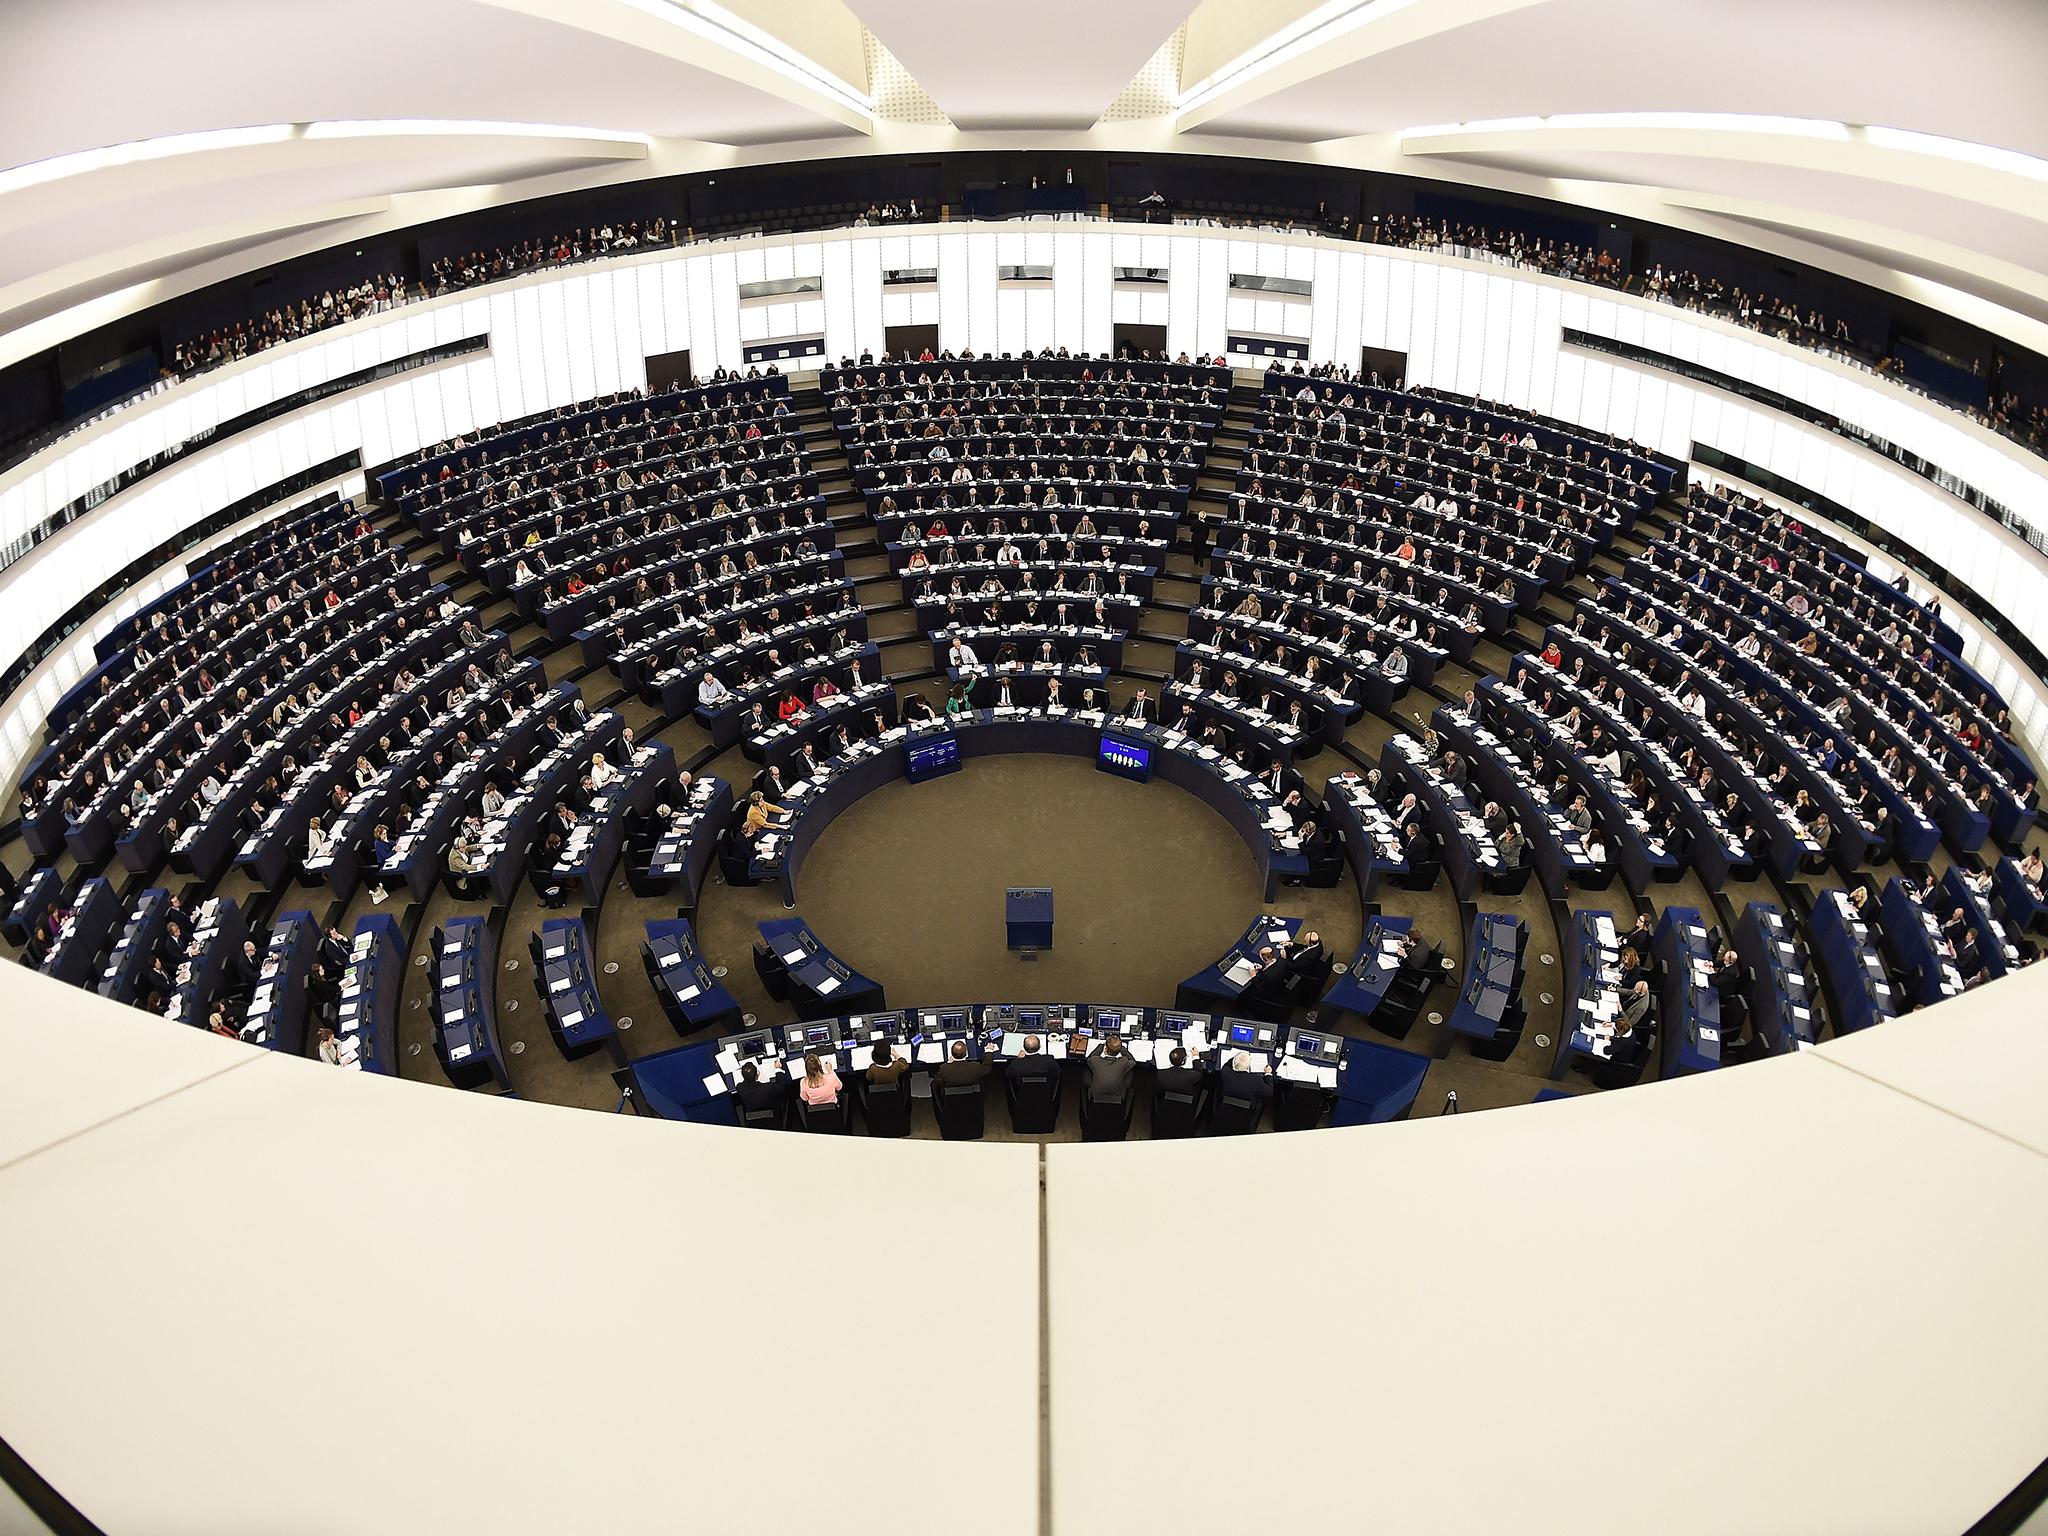 The European Parliament in Strasbourg voted on the resolution, aimed at tackling propaganda from Russia